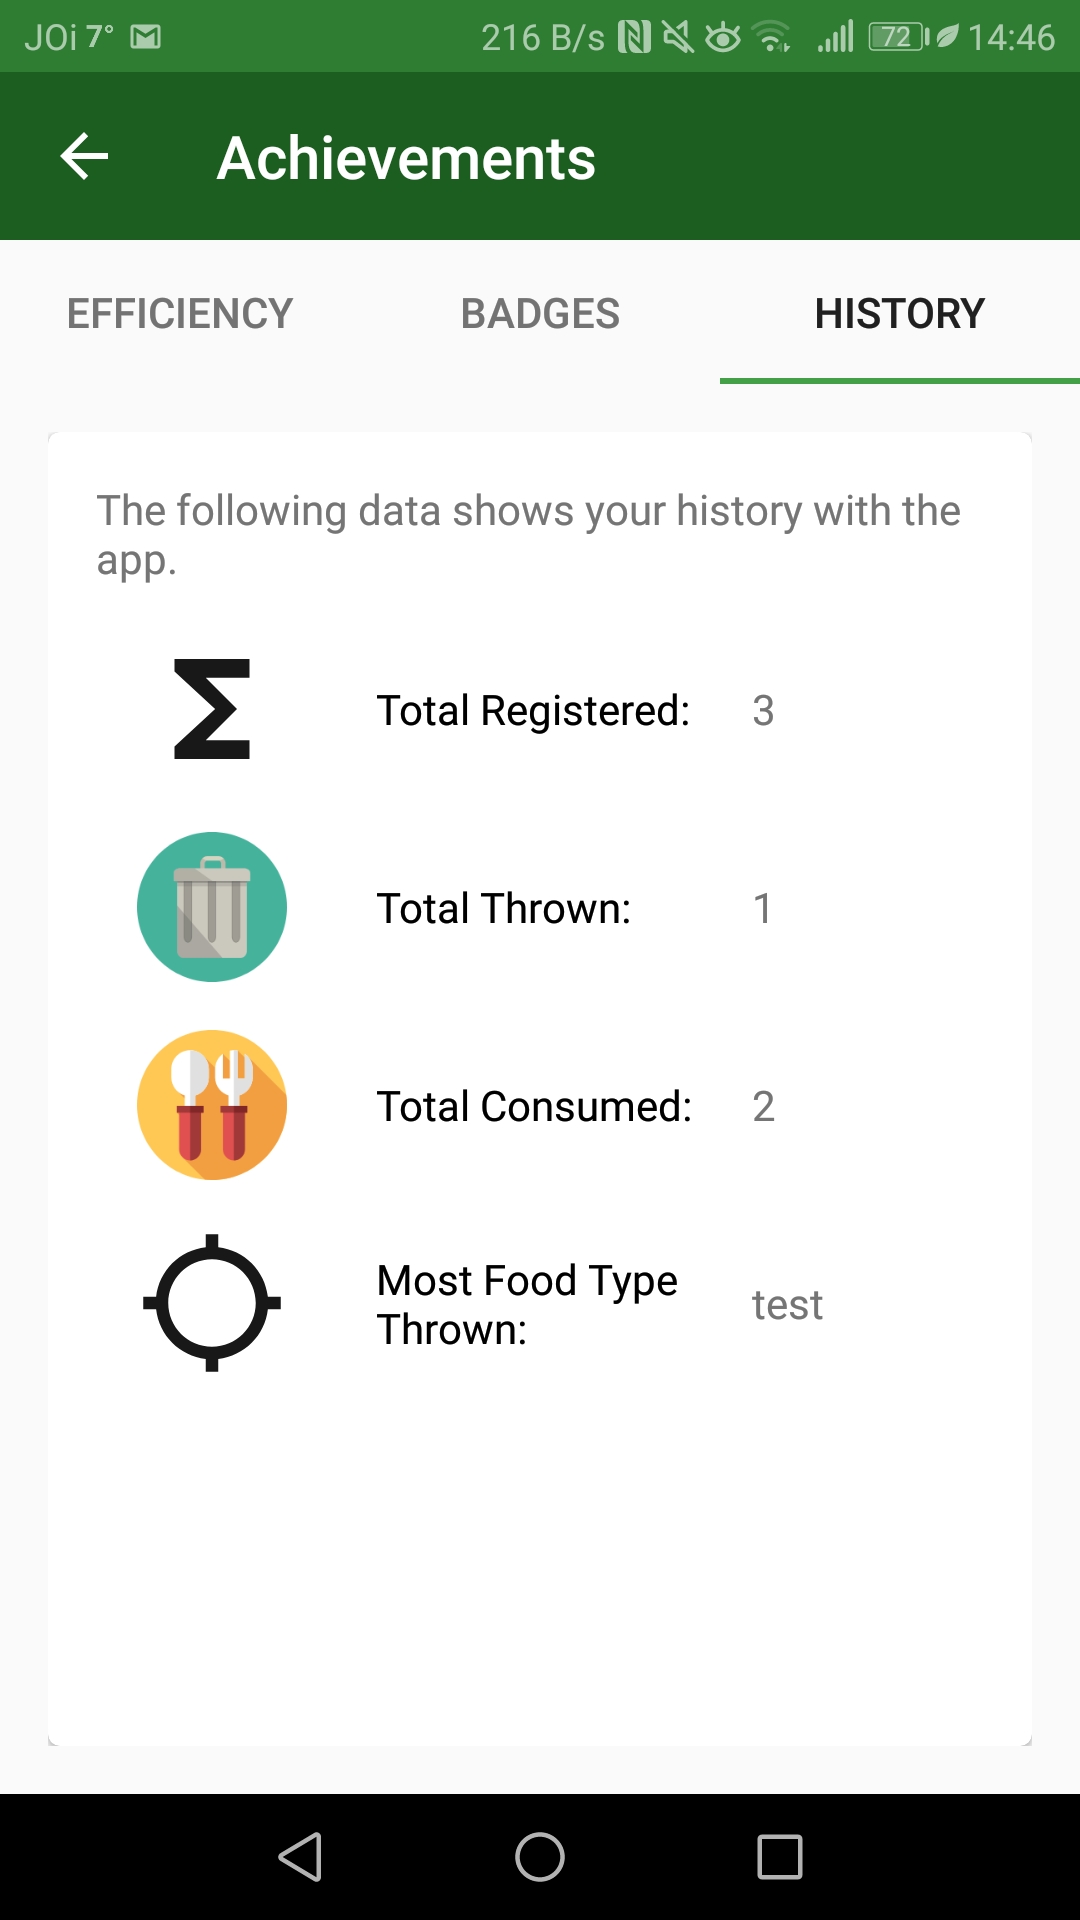 The history sub-section of achievement displays 
                            the amount of food the user has registered, thrown, consumed and the type of food the user has thrown 
                            out the most.